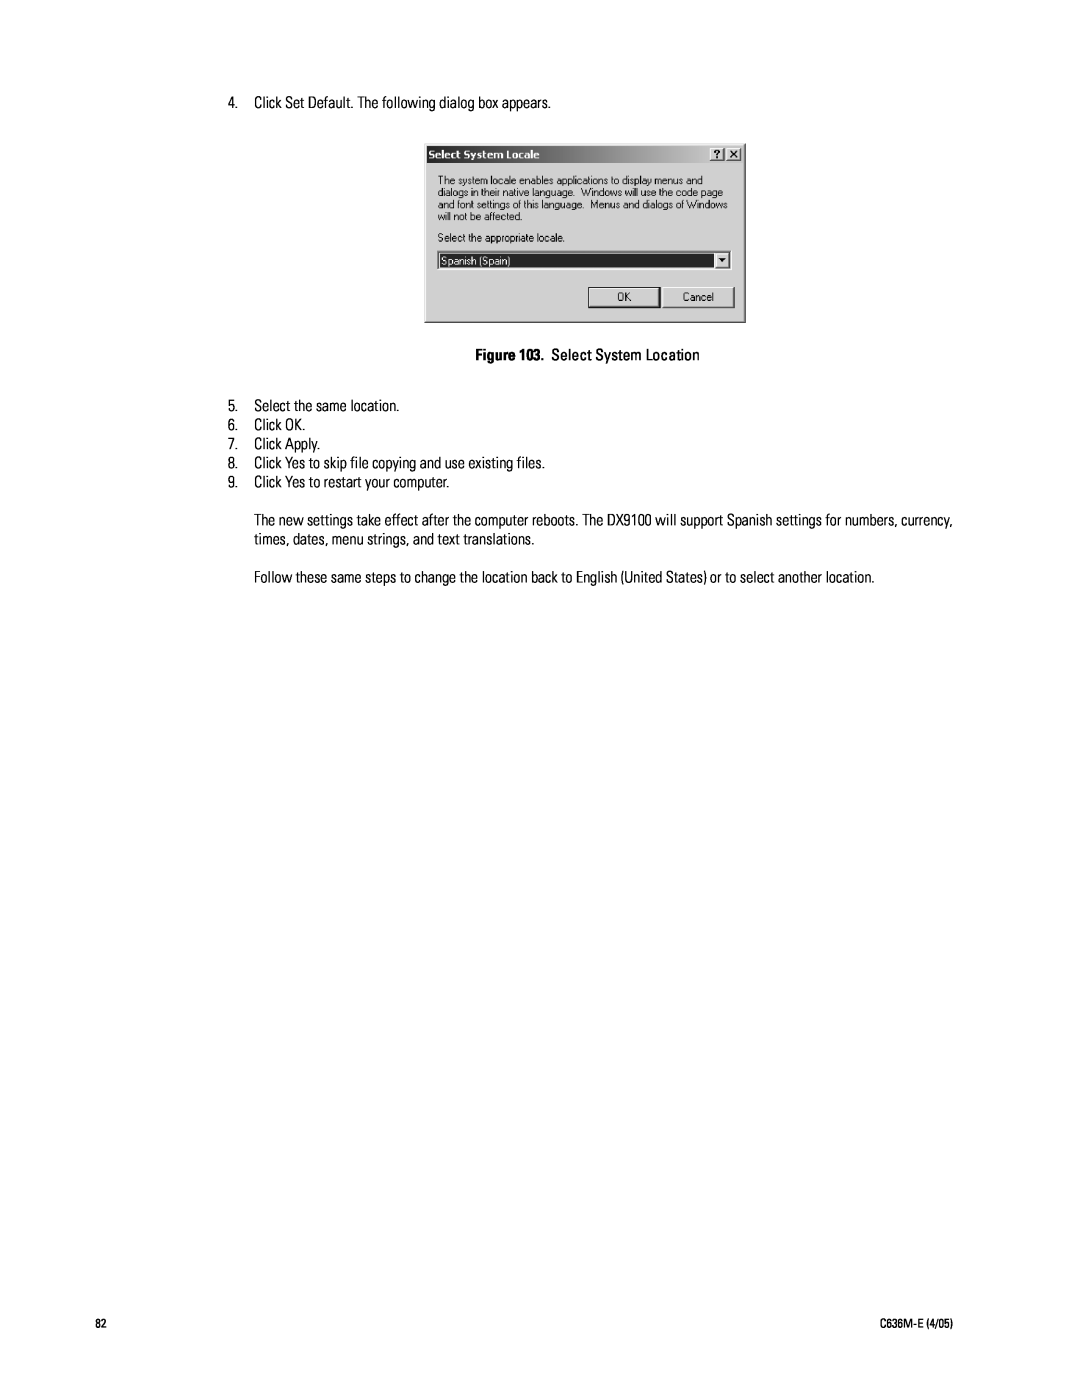 Pelco DX9100 installation manual Click Set Default. The following dialog box appears 